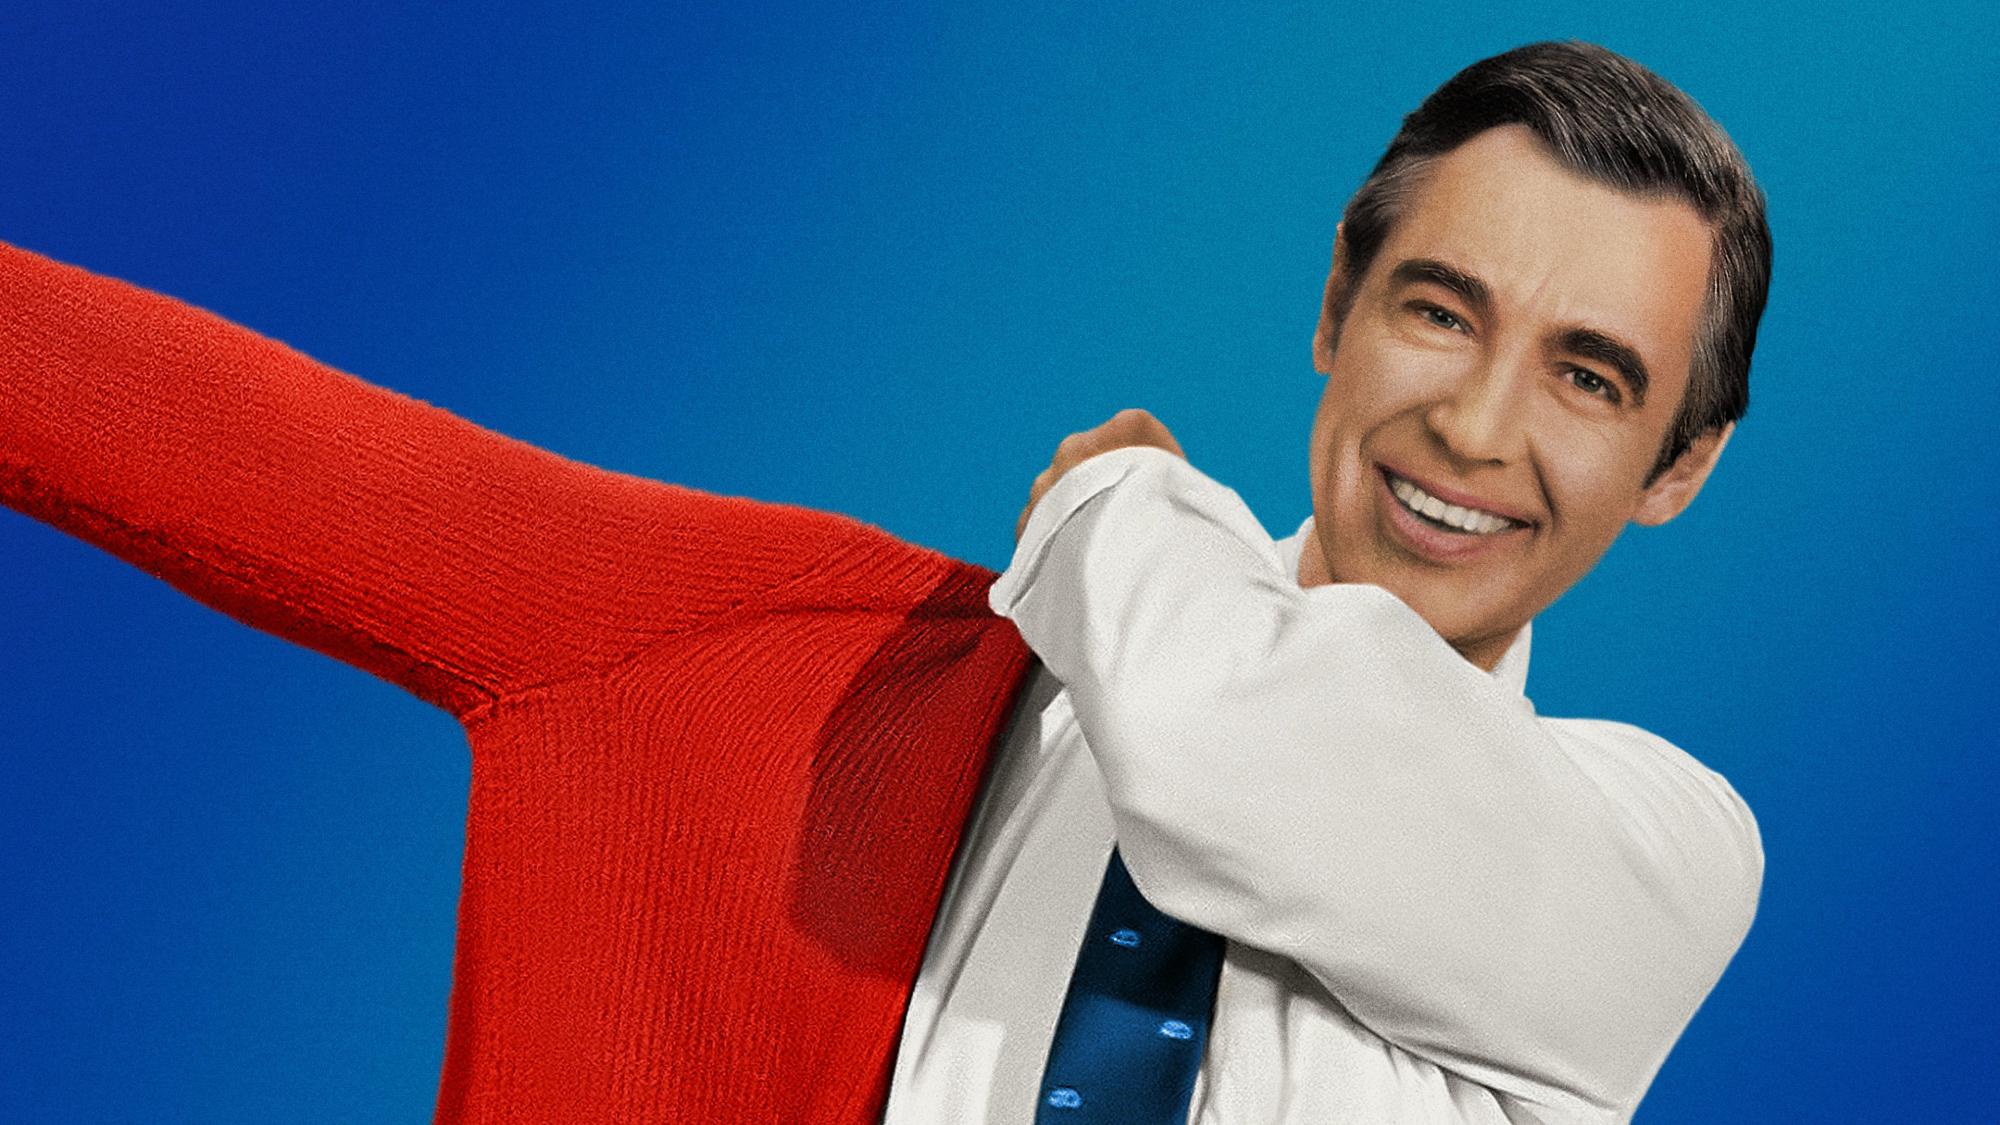 Backdrop Image for Won't You Be My Neighbor?